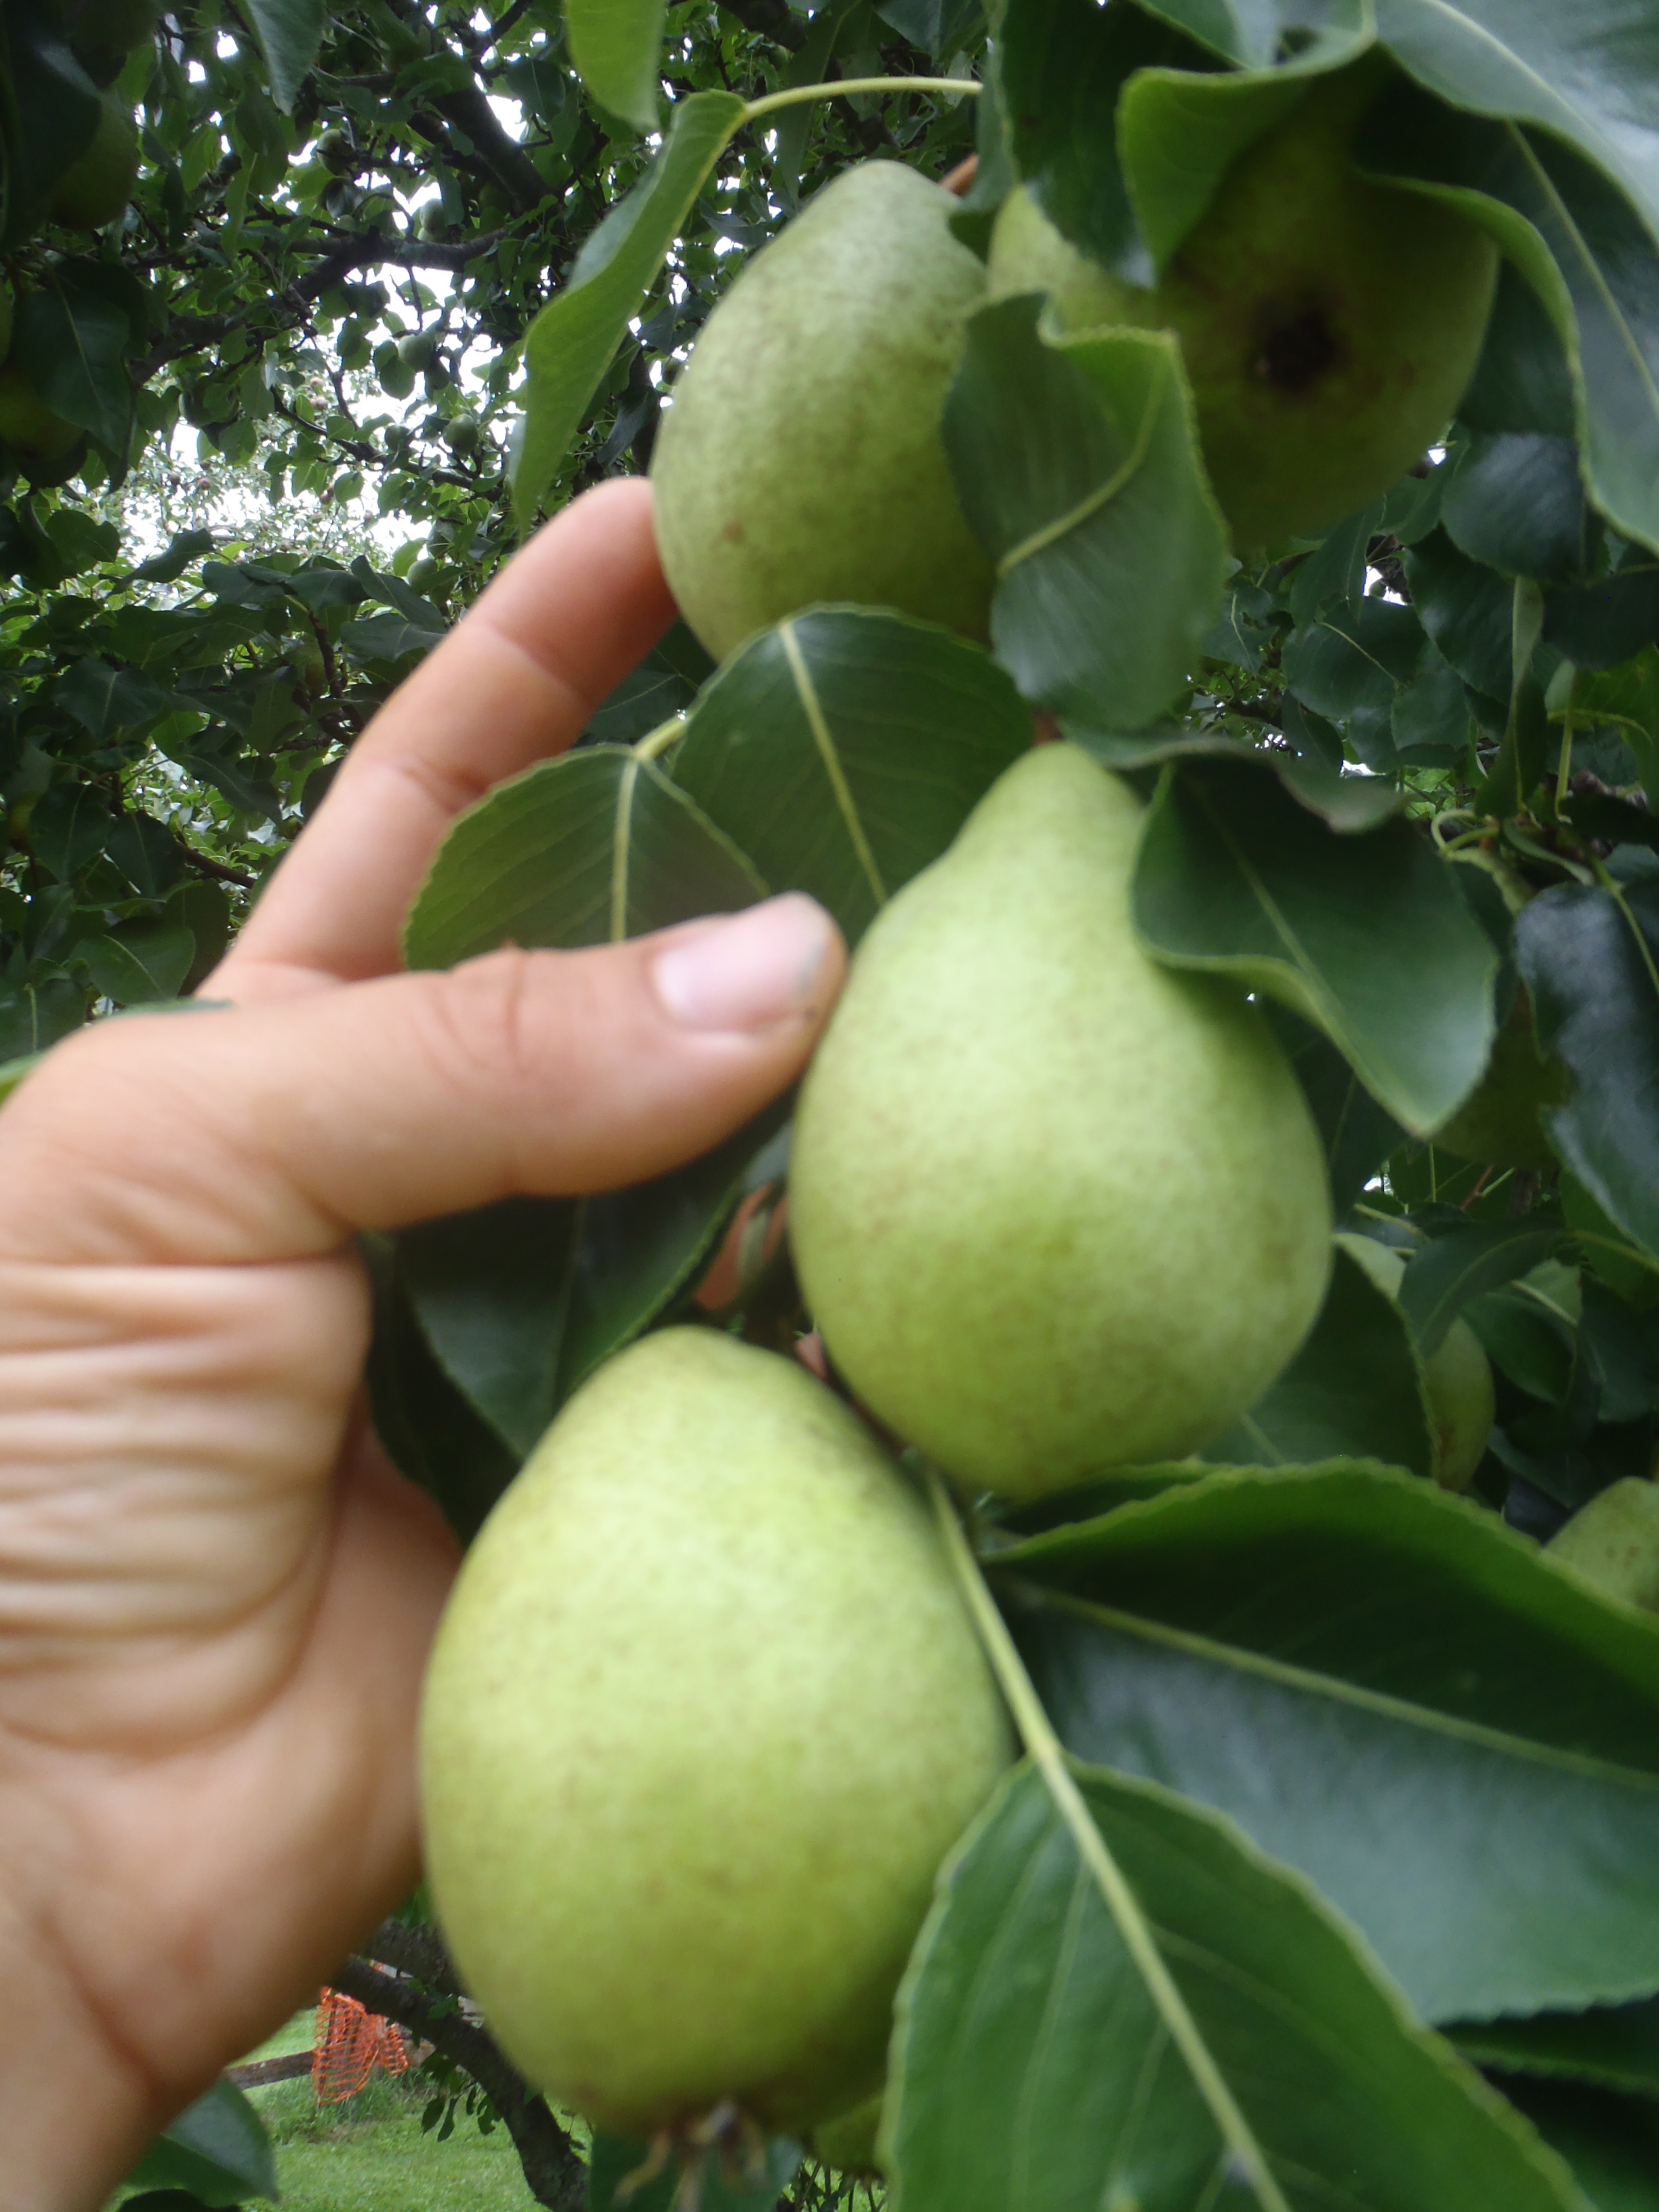 pears sizing up .jpg